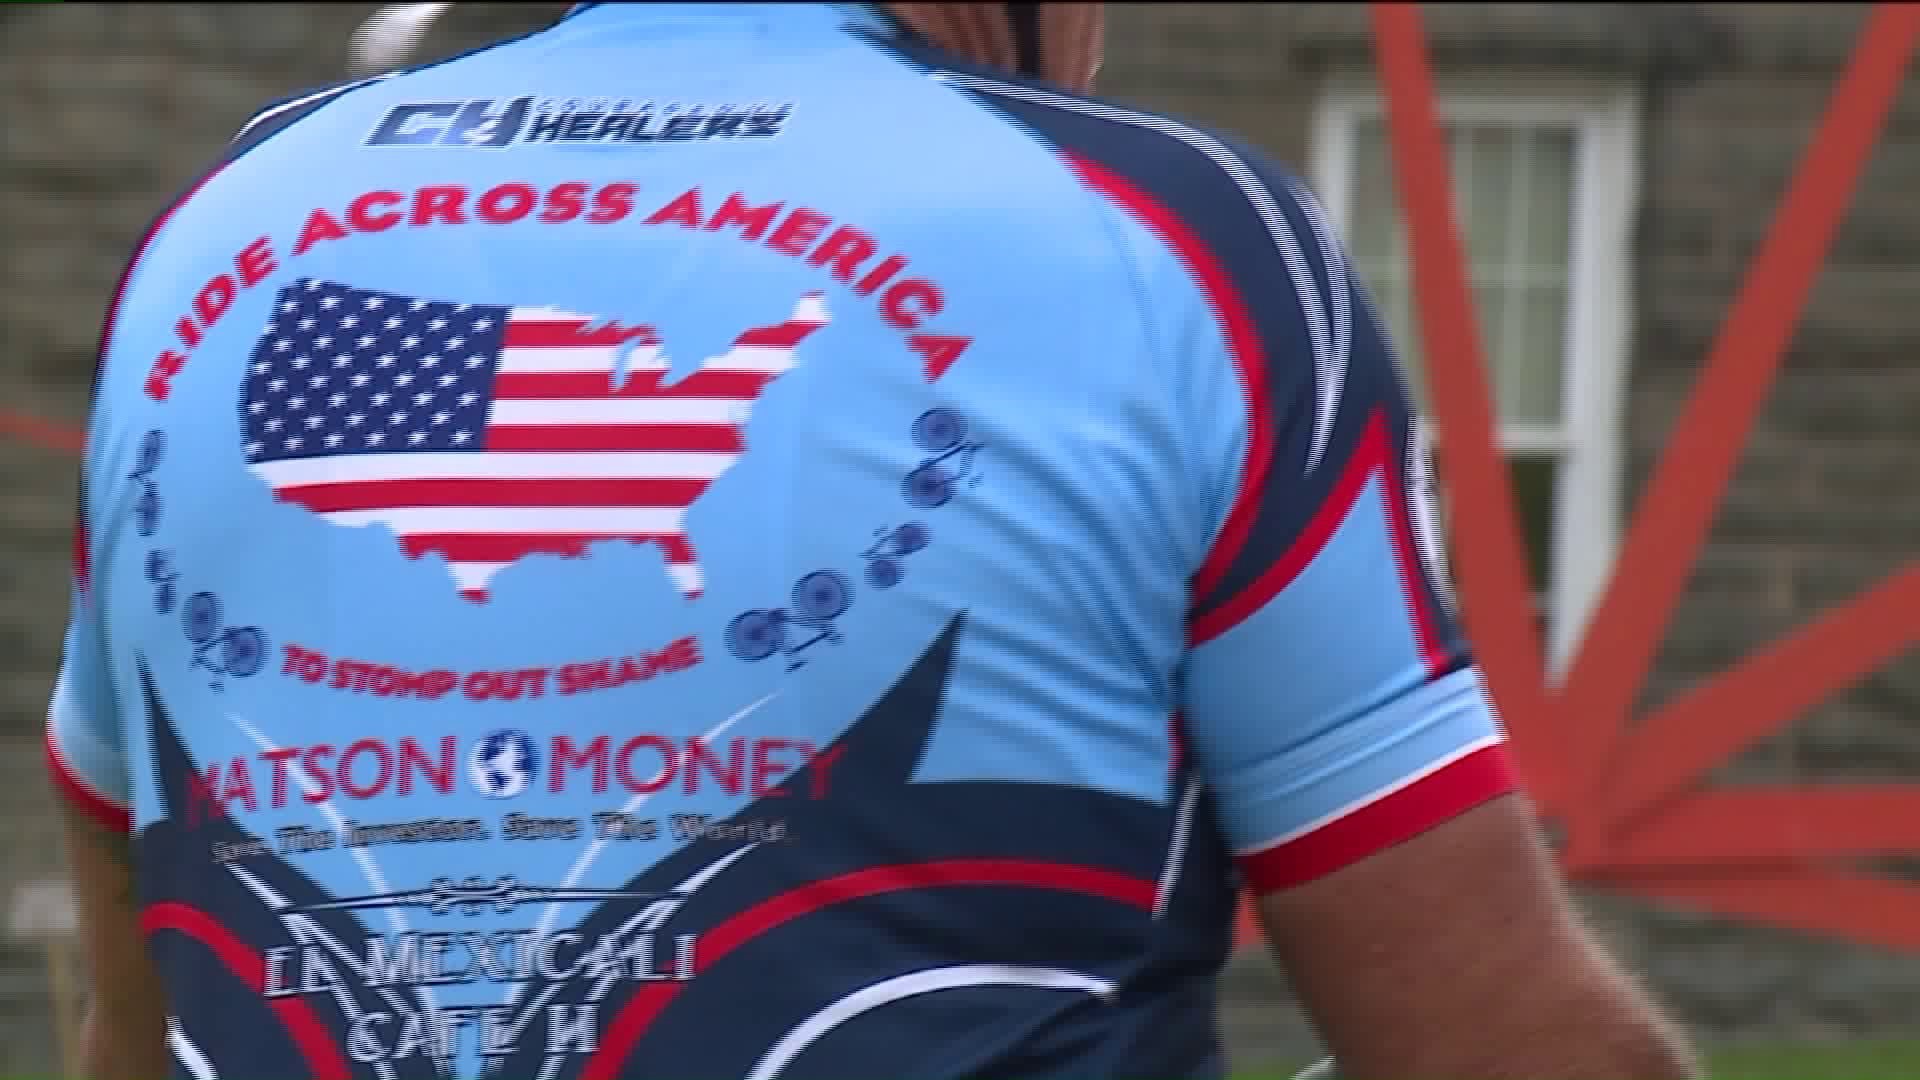 California Man Bikes to PA to Help End Sexual Abuse in Men and Boys